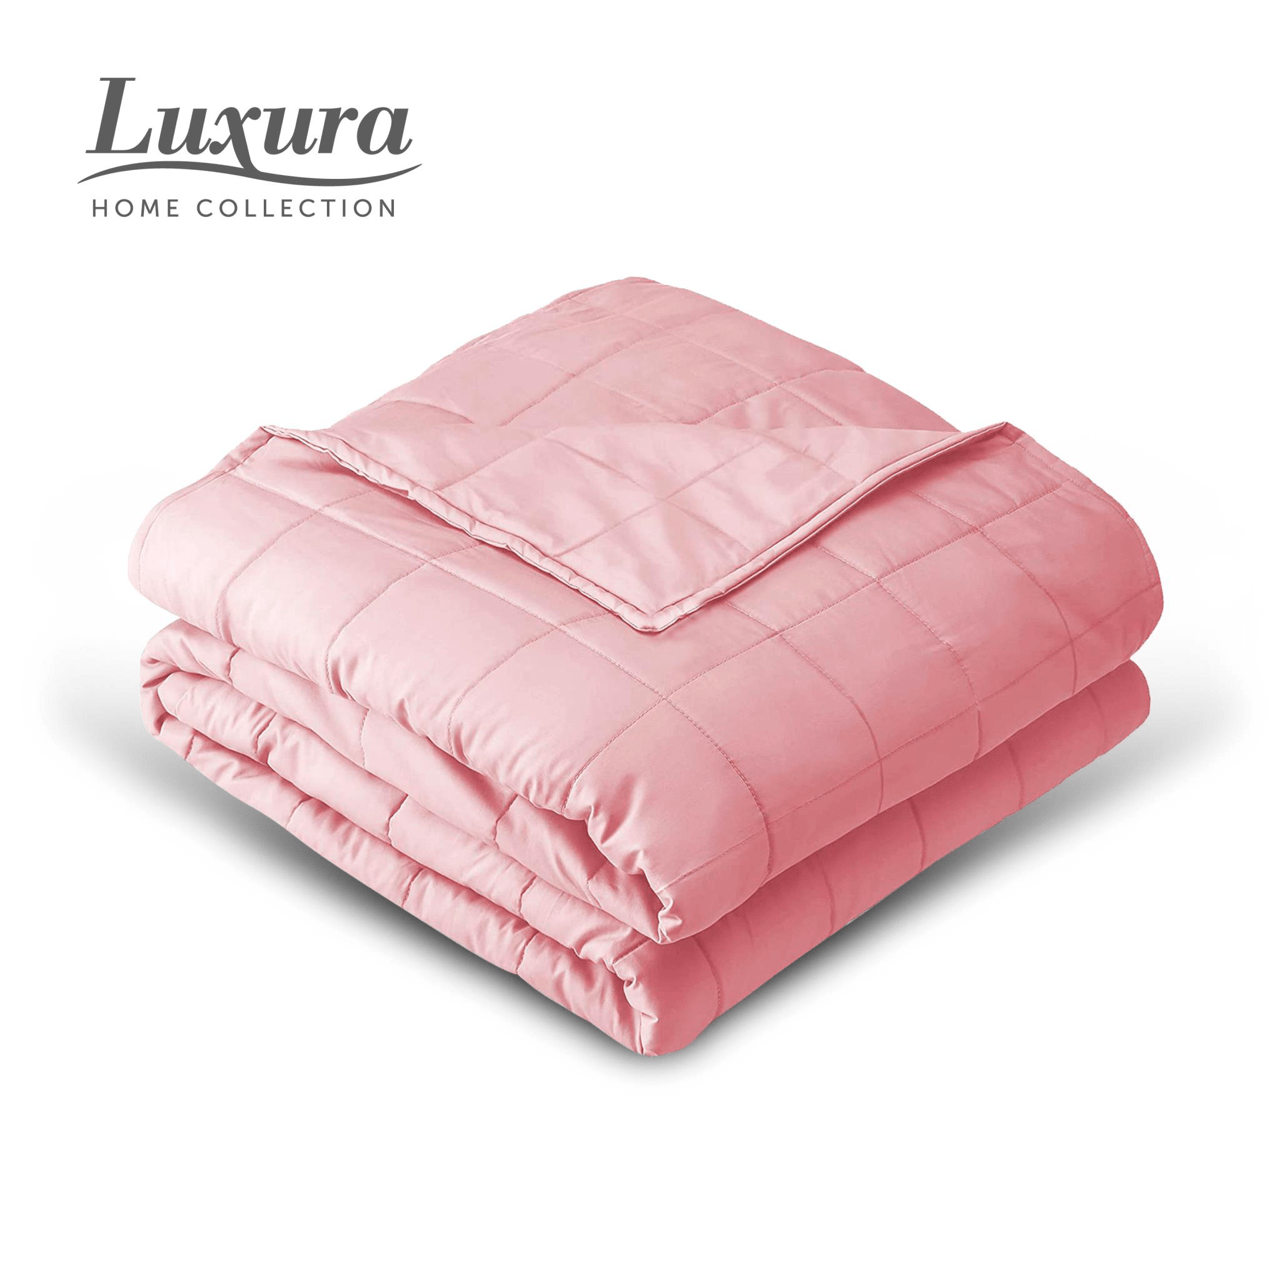 Weighted Blanket 125cm x 150cm 4Kg Pink 4605 (Parcel Rate)